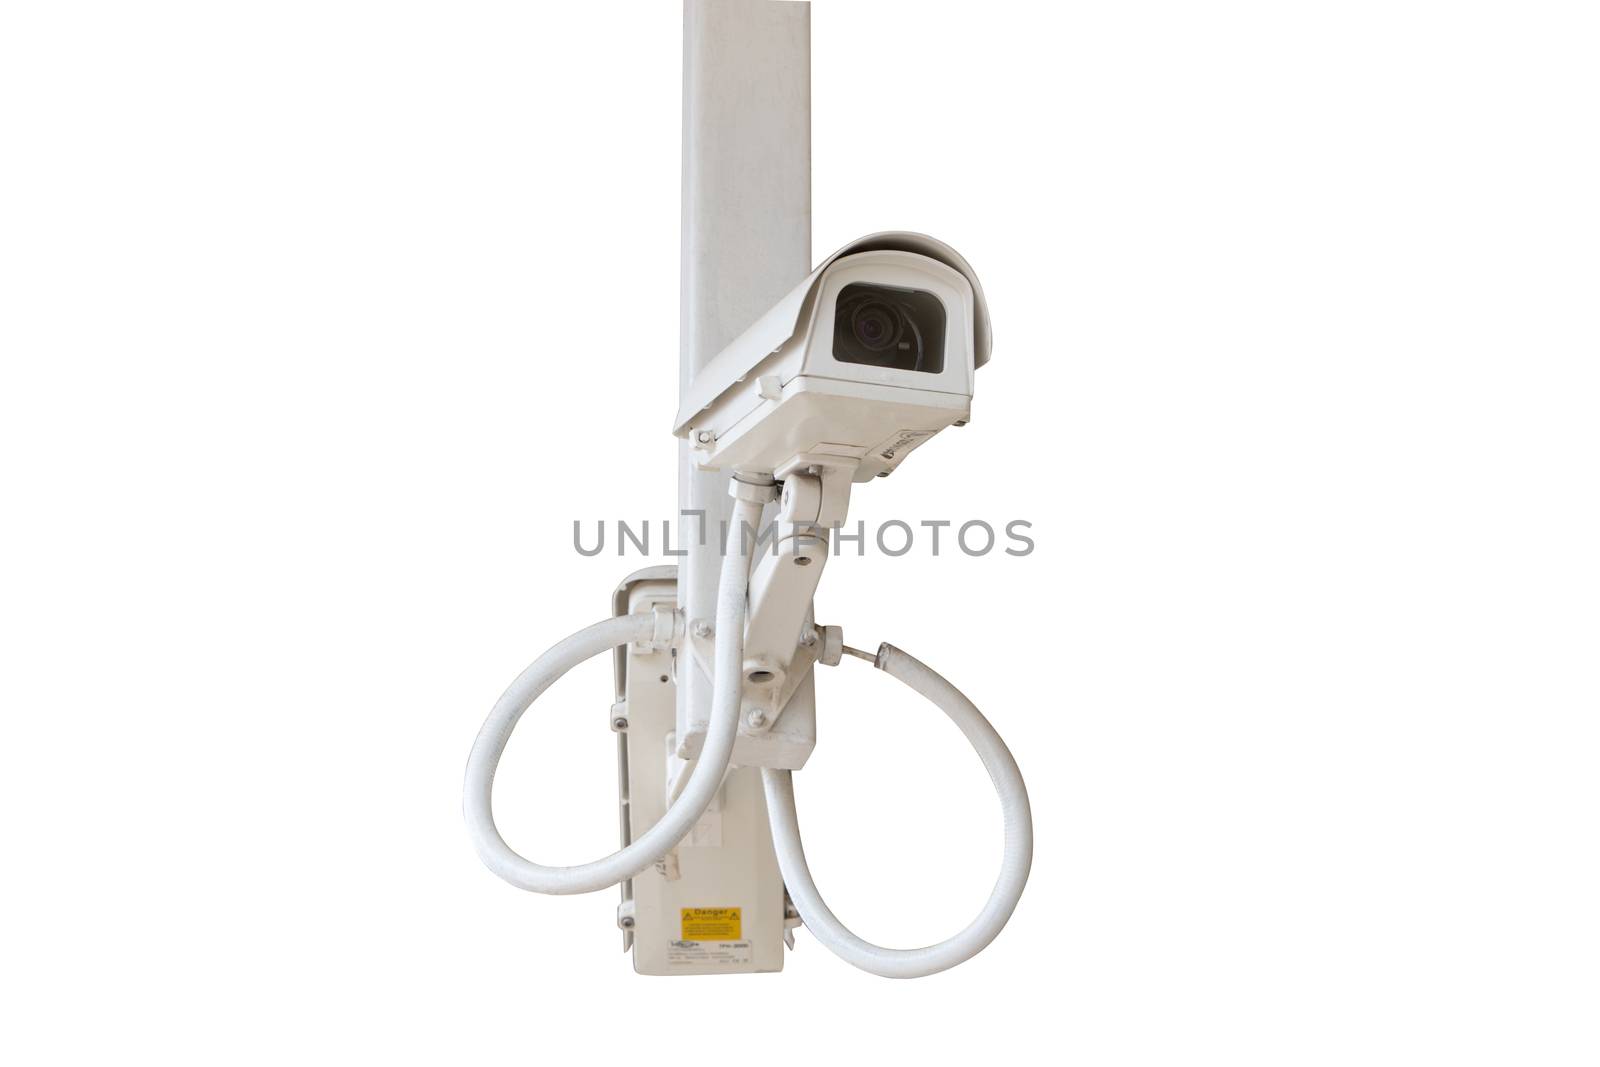 Security camera isolated on blue sky background.